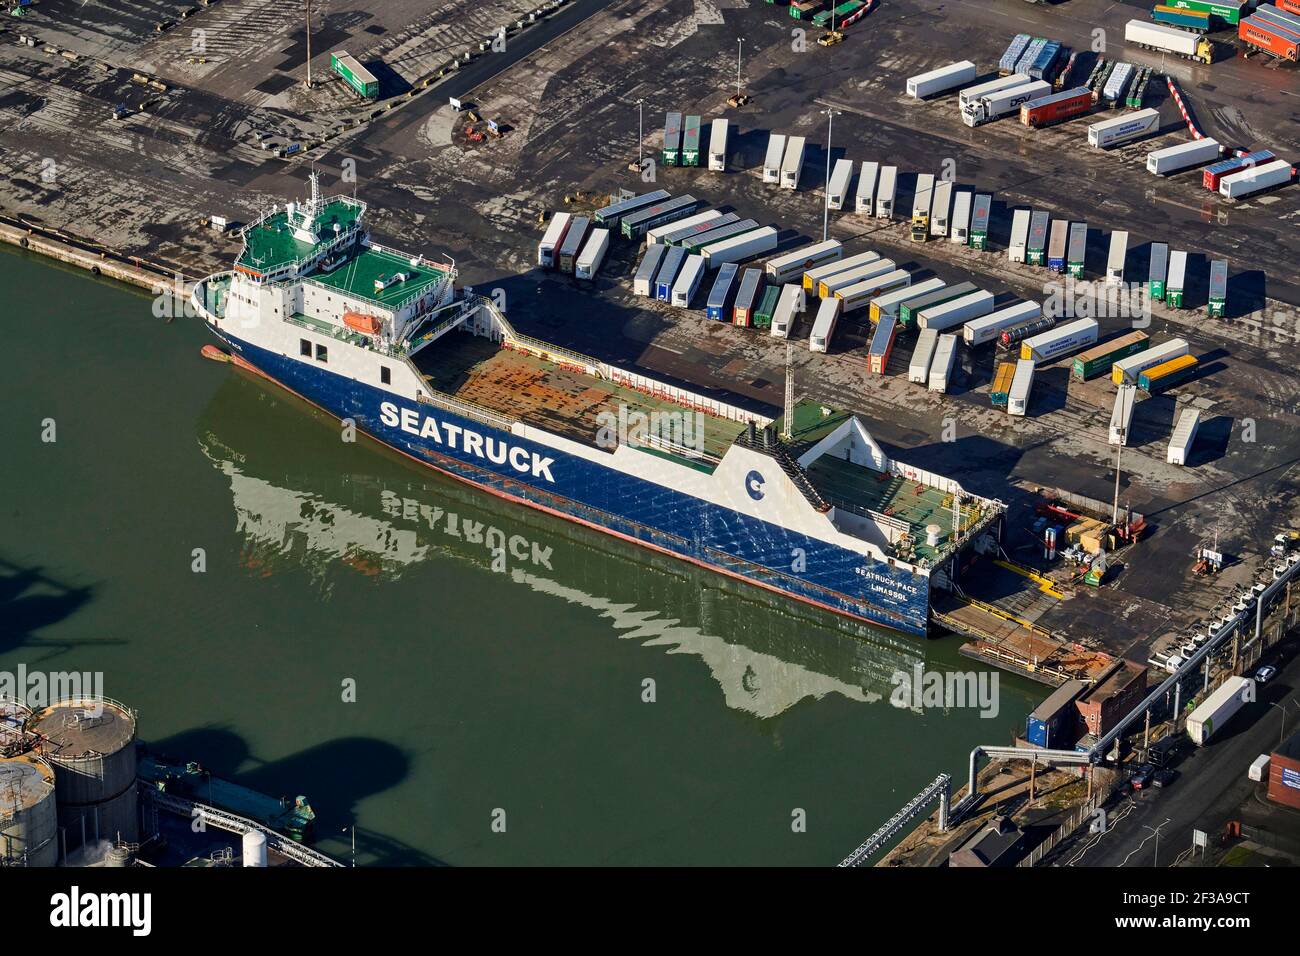 Sea truck ferry waiting to load at Seaforth Docks, Liverpool, north west England, Mersey side, Uk, from the air Stock Photo